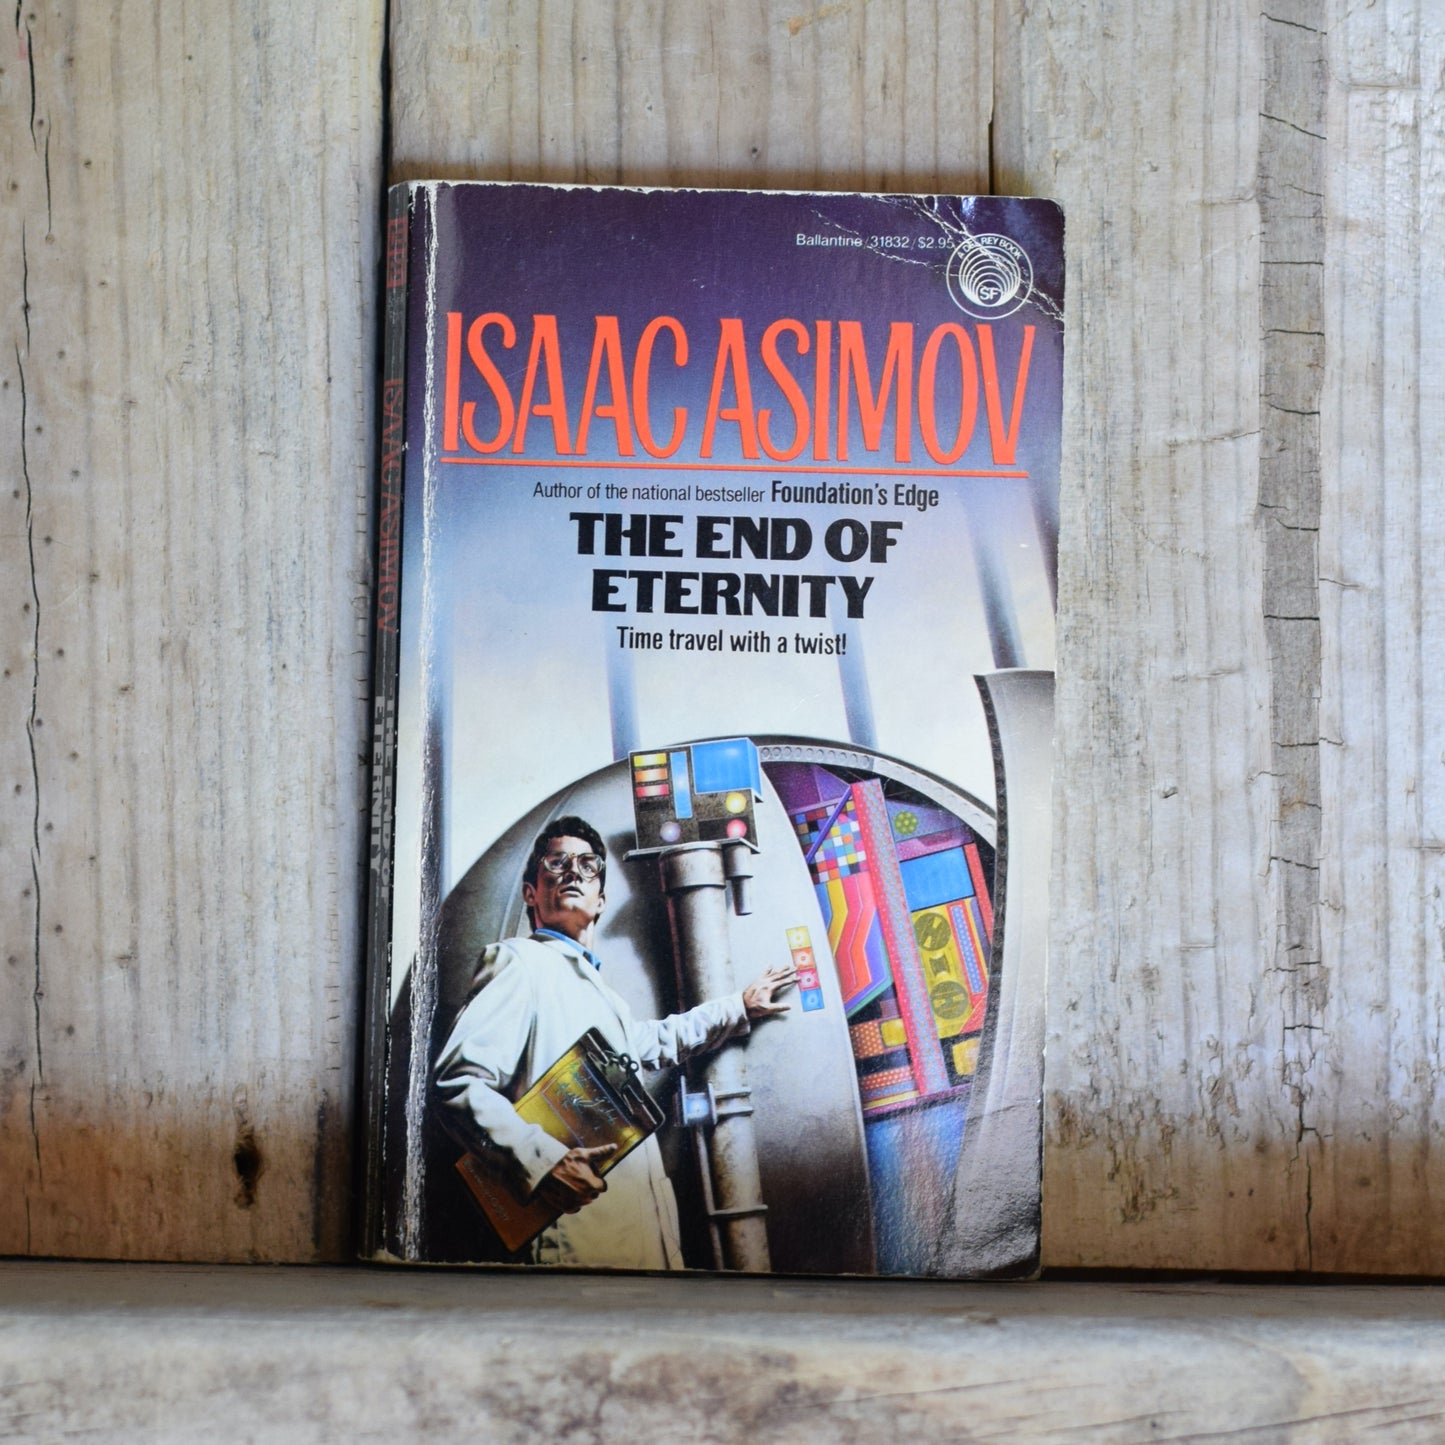 Vintage Sci-fi Paperback: Isaac Asimov - The End of Eternity